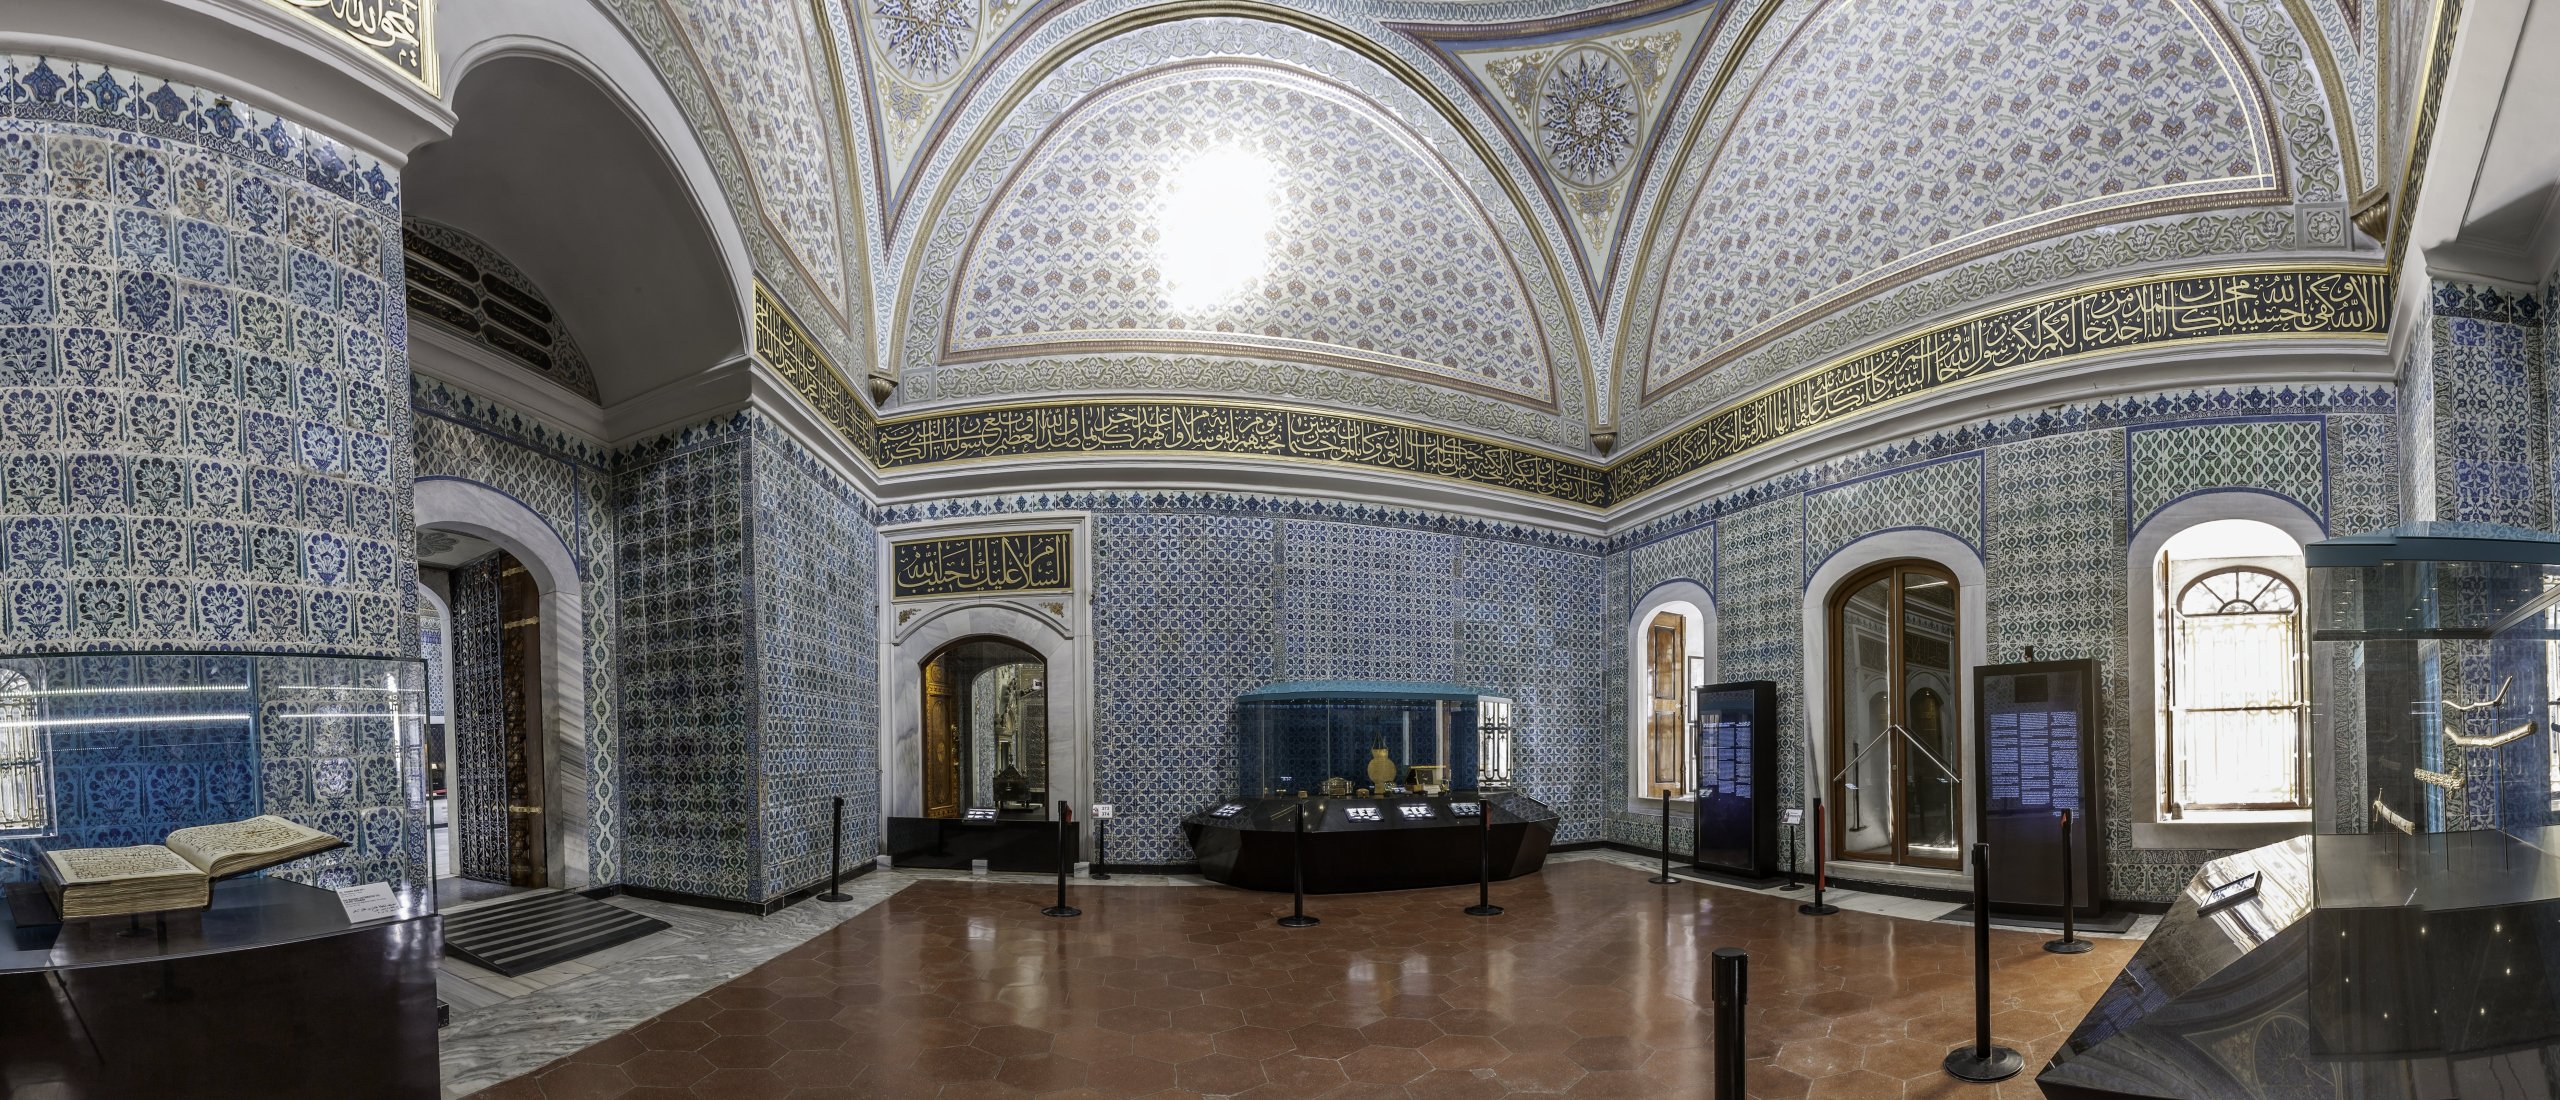 A panoramic view from the privy chamber, where the Sacred Relics are kept, Topkapı Palace, Istanbul, July 17, 2014. (Photo by Recai Kömür)